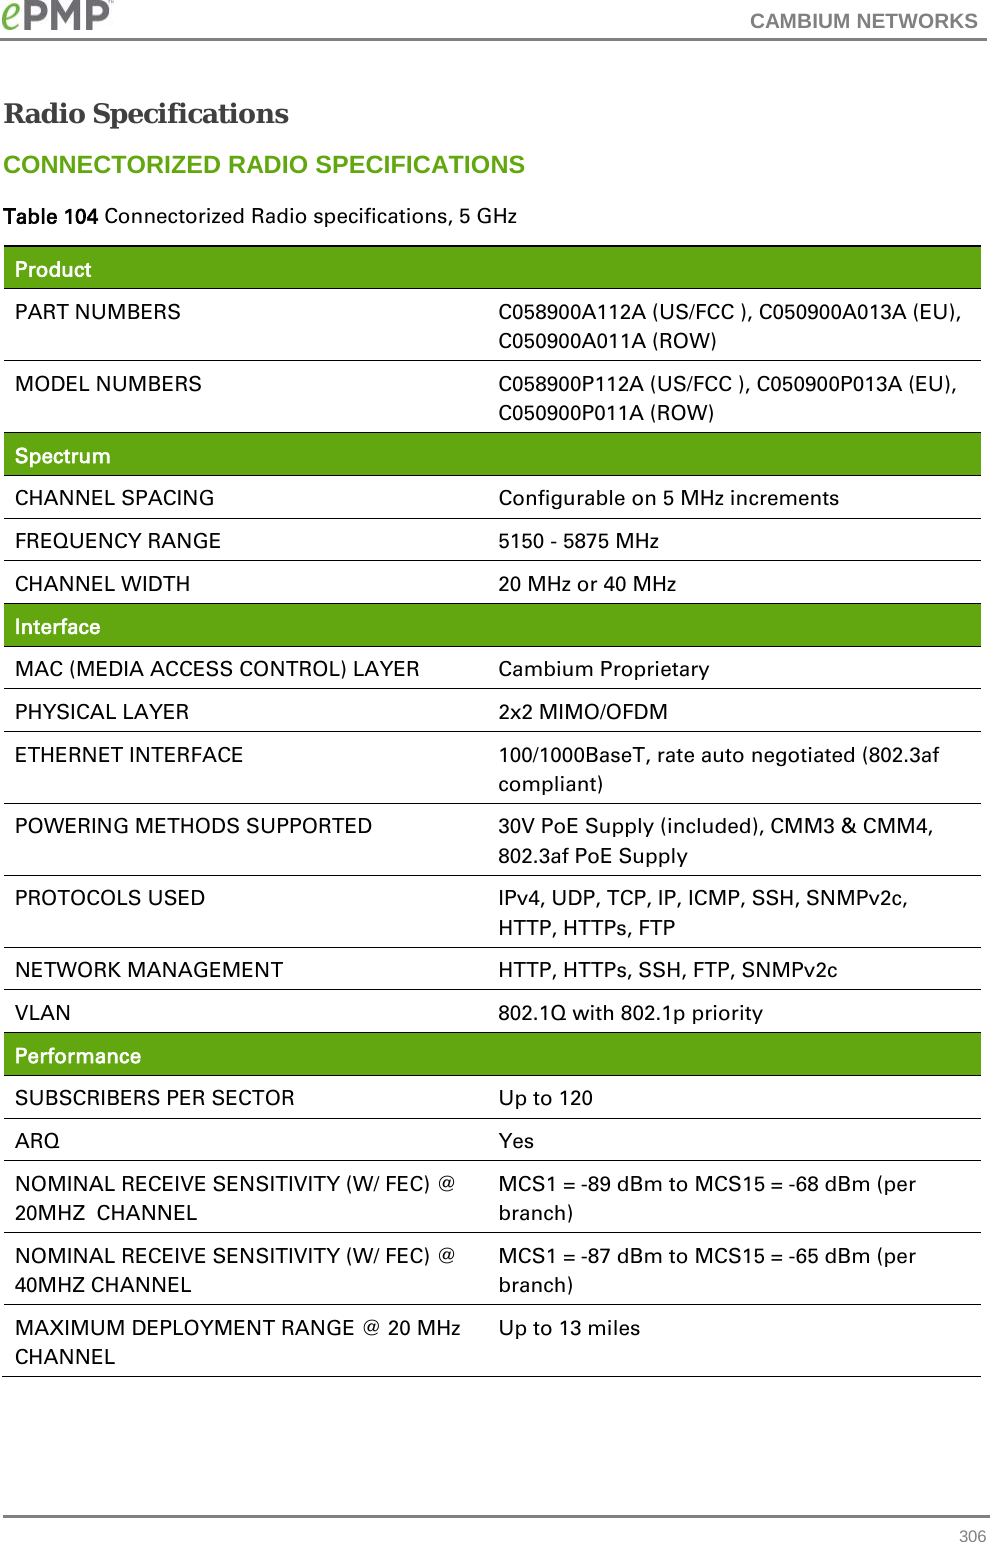 CAMBIUM NETWORKS  Radio Specifications CONNECTORIZED RADIO SPECIFICATIONS Table 104 Connectorized Radio specifications, 5 GHz Product  PART NUMBERS C058900A112A (US/FCC ), C050900A013A (EU), C050900A011A (ROW) MODEL NUMBERS C058900P112A (US/FCC ), C050900P013A (EU), C050900P011A (ROW) Spectrum  CHANNEL SPACING Configurable on 5 MHz increments FREQUENCY RANGE 5150 - 5875 MHz CHANNEL WIDTH 20 MHz or 40 MHz Interface  MAC (MEDIA ACCESS CONTROL) LAYER Cambium Proprietary PHYSICAL LAYER 2x2 MIMO/OFDM ETHERNET INTERFACE 100/1000BaseT, rate auto negotiated (802.3af compliant) POWERING METHODS SUPPORTED 30V PoE Supply (included), CMM3 &amp; CMM4, 802.3af PoE Supply PROTOCOLS USED IPv4, UDP, TCP, IP, ICMP, SSH, SNMPv2c, HTTP, HTTPs, FTP NETWORK MANAGEMENT HTTP, HTTPs, SSH, FTP, SNMPv2c VLAN 802.1Q with 802.1p priority Performance  SUBSCRIBERS PER SECTOR Up to 120 ARQ Yes NOMINAL RECEIVE SENSITIVITY (W/ FEC) @ 20MHZ  CHANNEL MCS1 = -89 dBm to MCS15 = -68 dBm (per branch) NOMINAL RECEIVE SENSITIVITY (W/ FEC) @ 40MHZ CHANNEL MCS1 = -87 dBm to MCS15 = -65 dBm (per branch) MAXIMUM DEPLOYMENT RANGE @ 20 MHz CHANNEL Up to 13 miles  306 